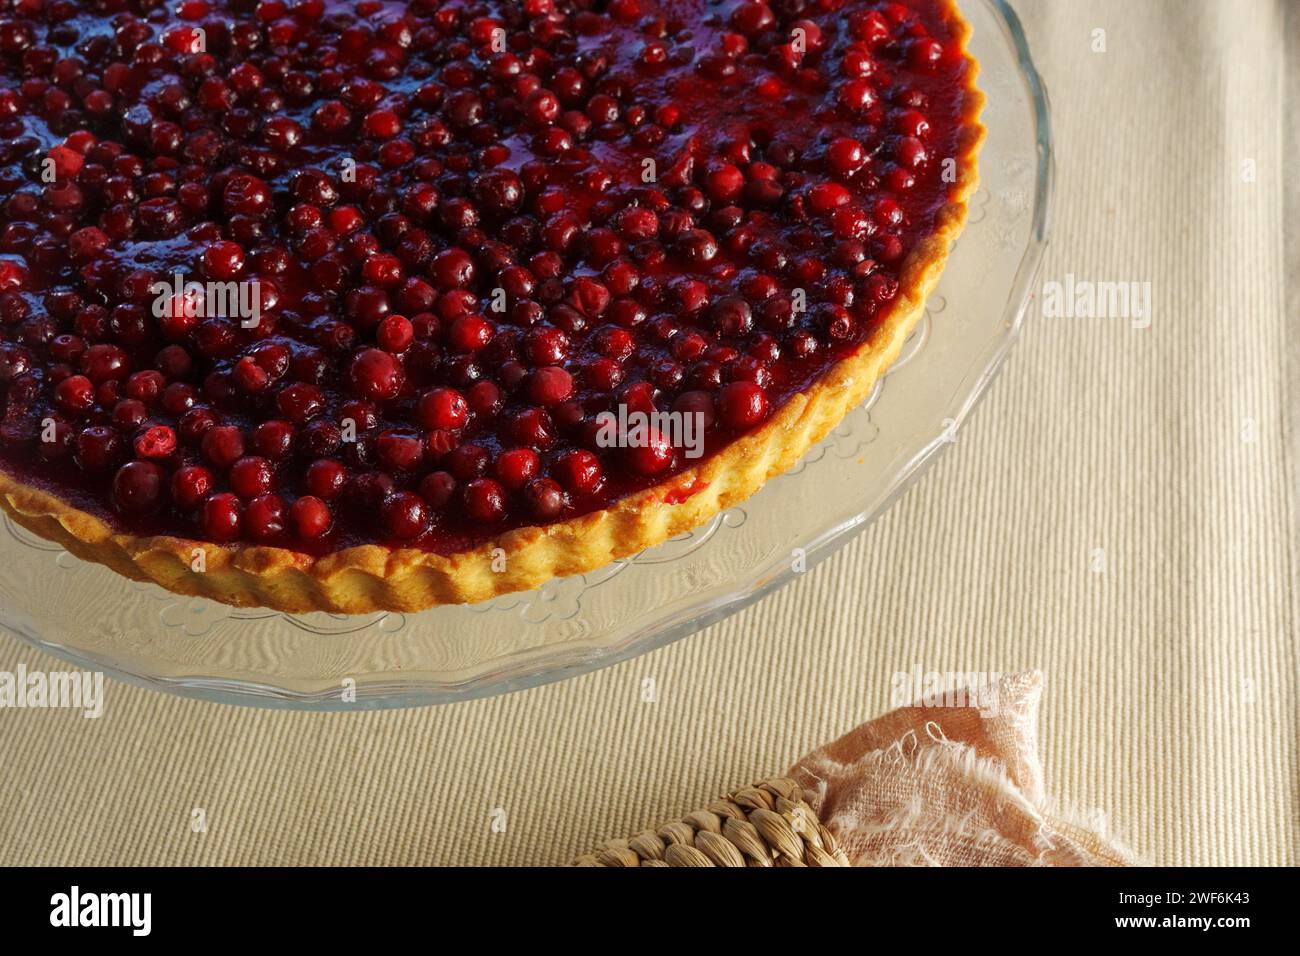 Gleaming Gastronomy: A Luscious Pie Gracefully Resting on a Delicate Glass Plate Stock Photo